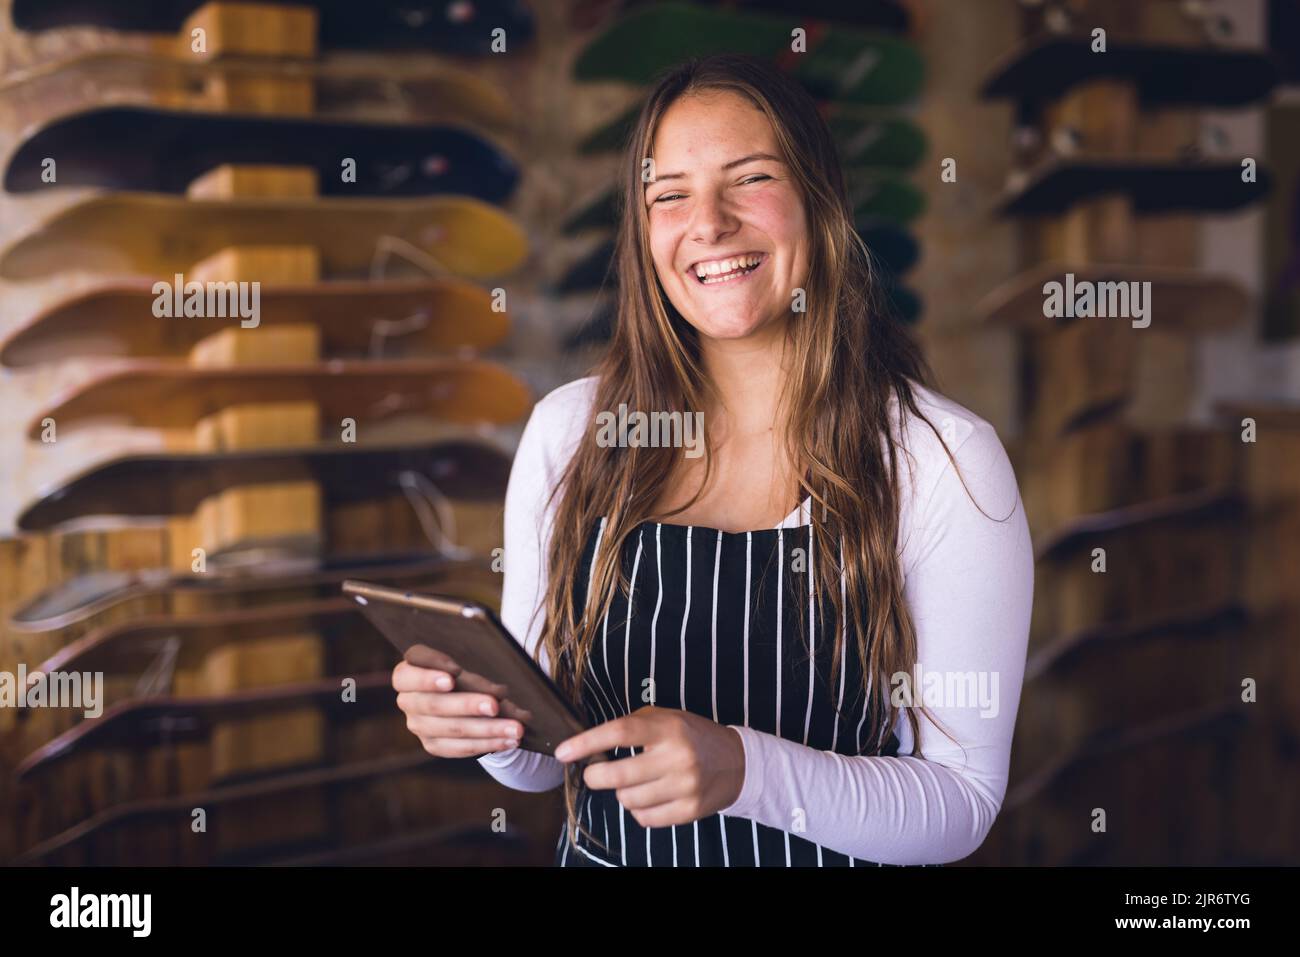 Image of happy caucasian woman in apron with tablet posing in skate shop Stock Photo